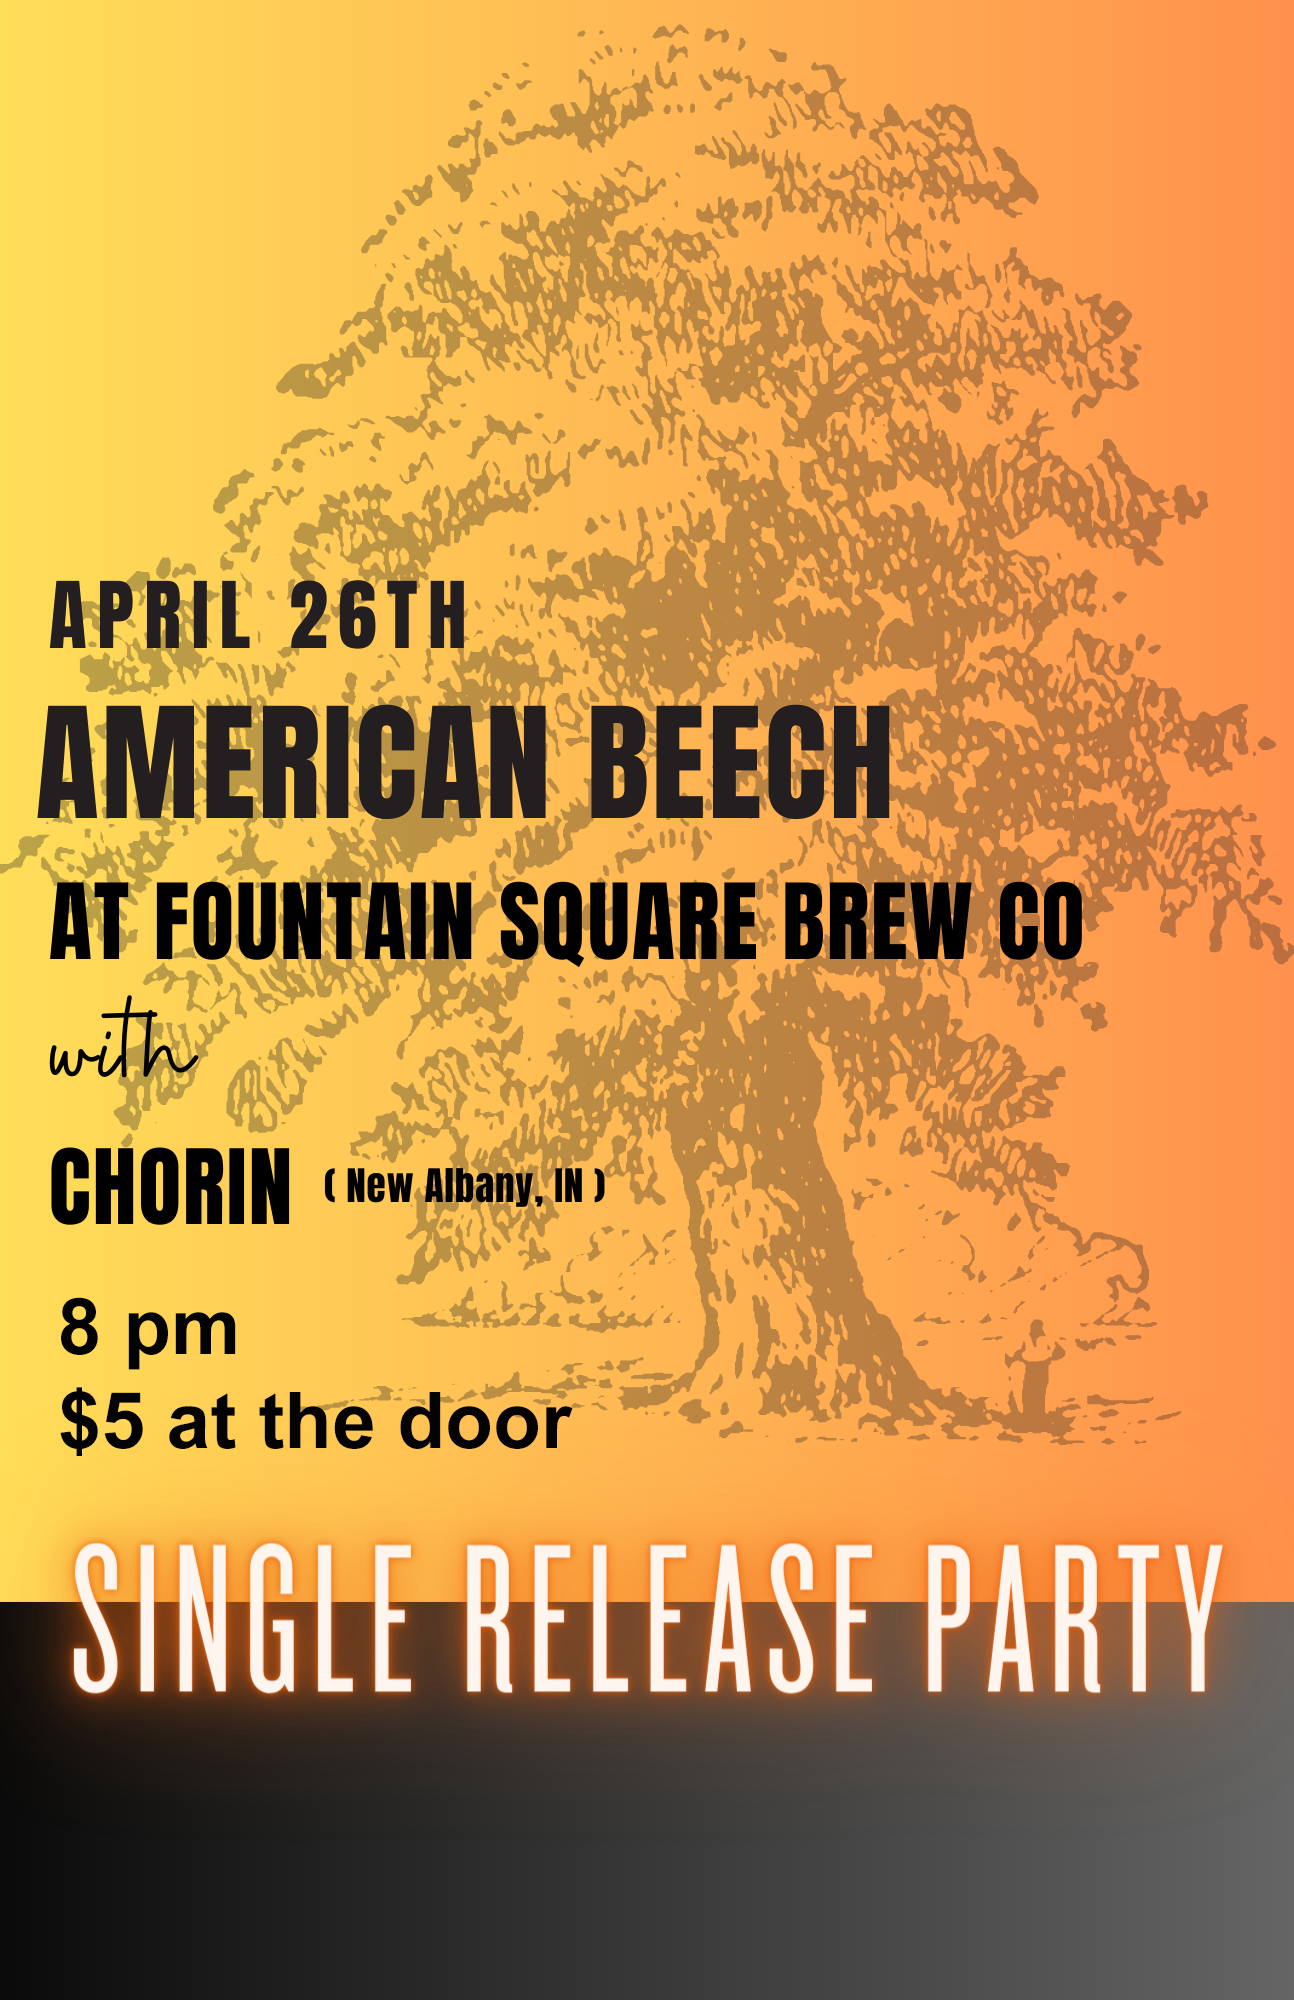 American Beech and Chorin play on Friday, April 26 at 8 p.m.